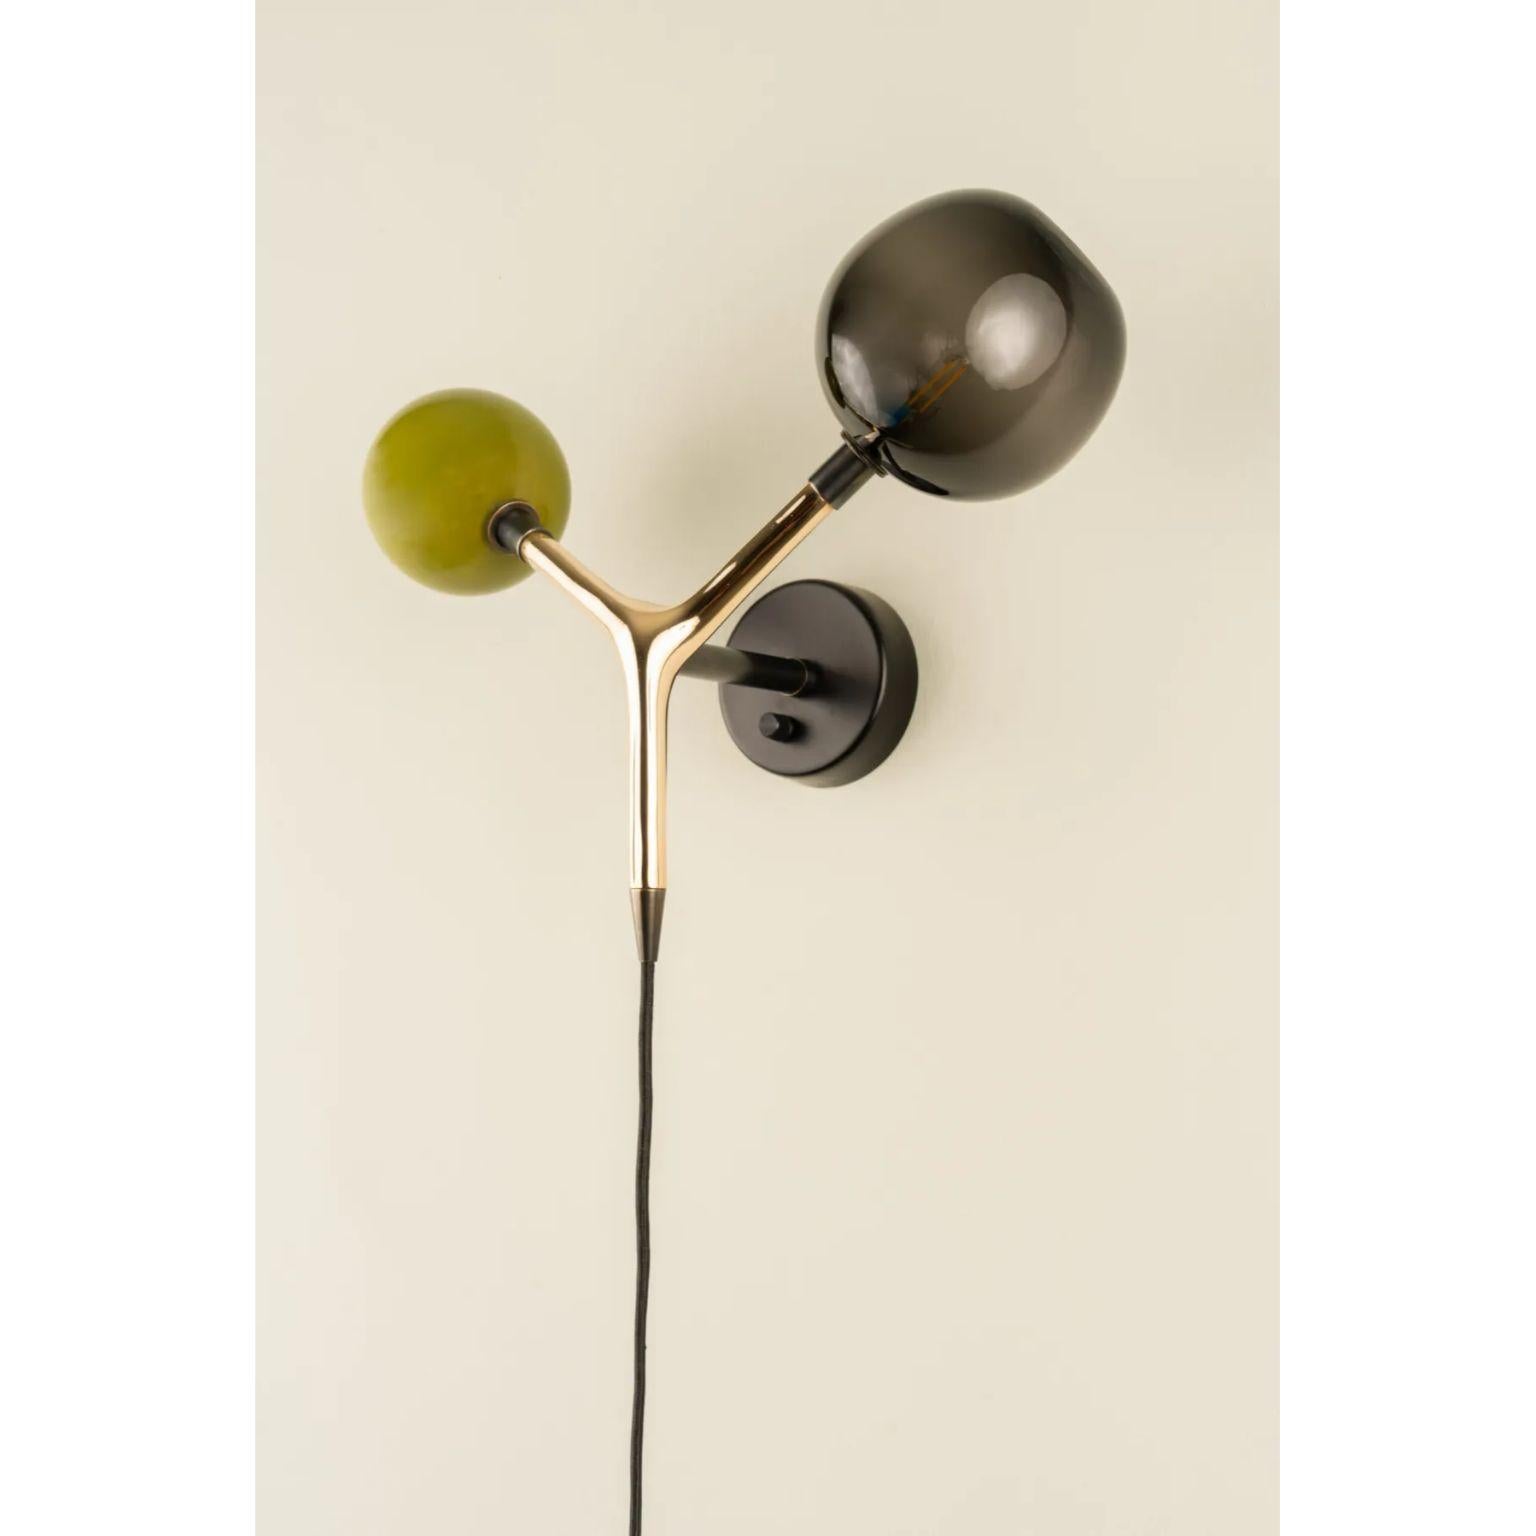 Ojos Olive and Smoke Sconce by Isabel Moncada
Dimensions: D 24 x W 49 x H 35 cm.
Materials: Cast bronze body, two blown glass globes, brass fittings and rayon sheathed cable.

Eyes that glow to be seen.
This sconce is the perfect solution for any